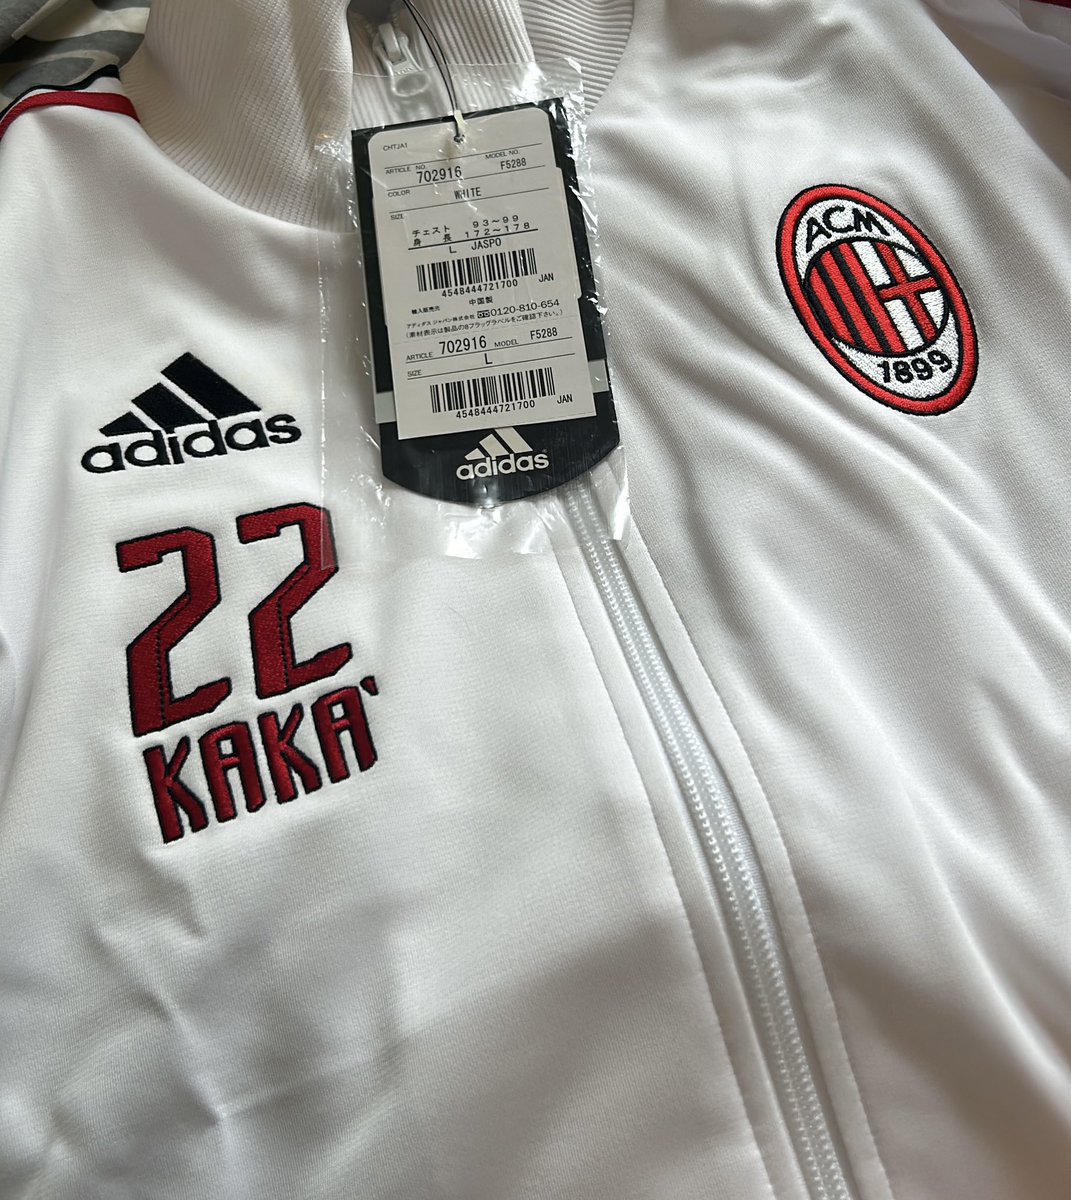 Something outrageous arrived👀 I bought this for myself but sadly doesn’t fit so will be available at some stage! More photos to come👍 #footballshirt #football #milan